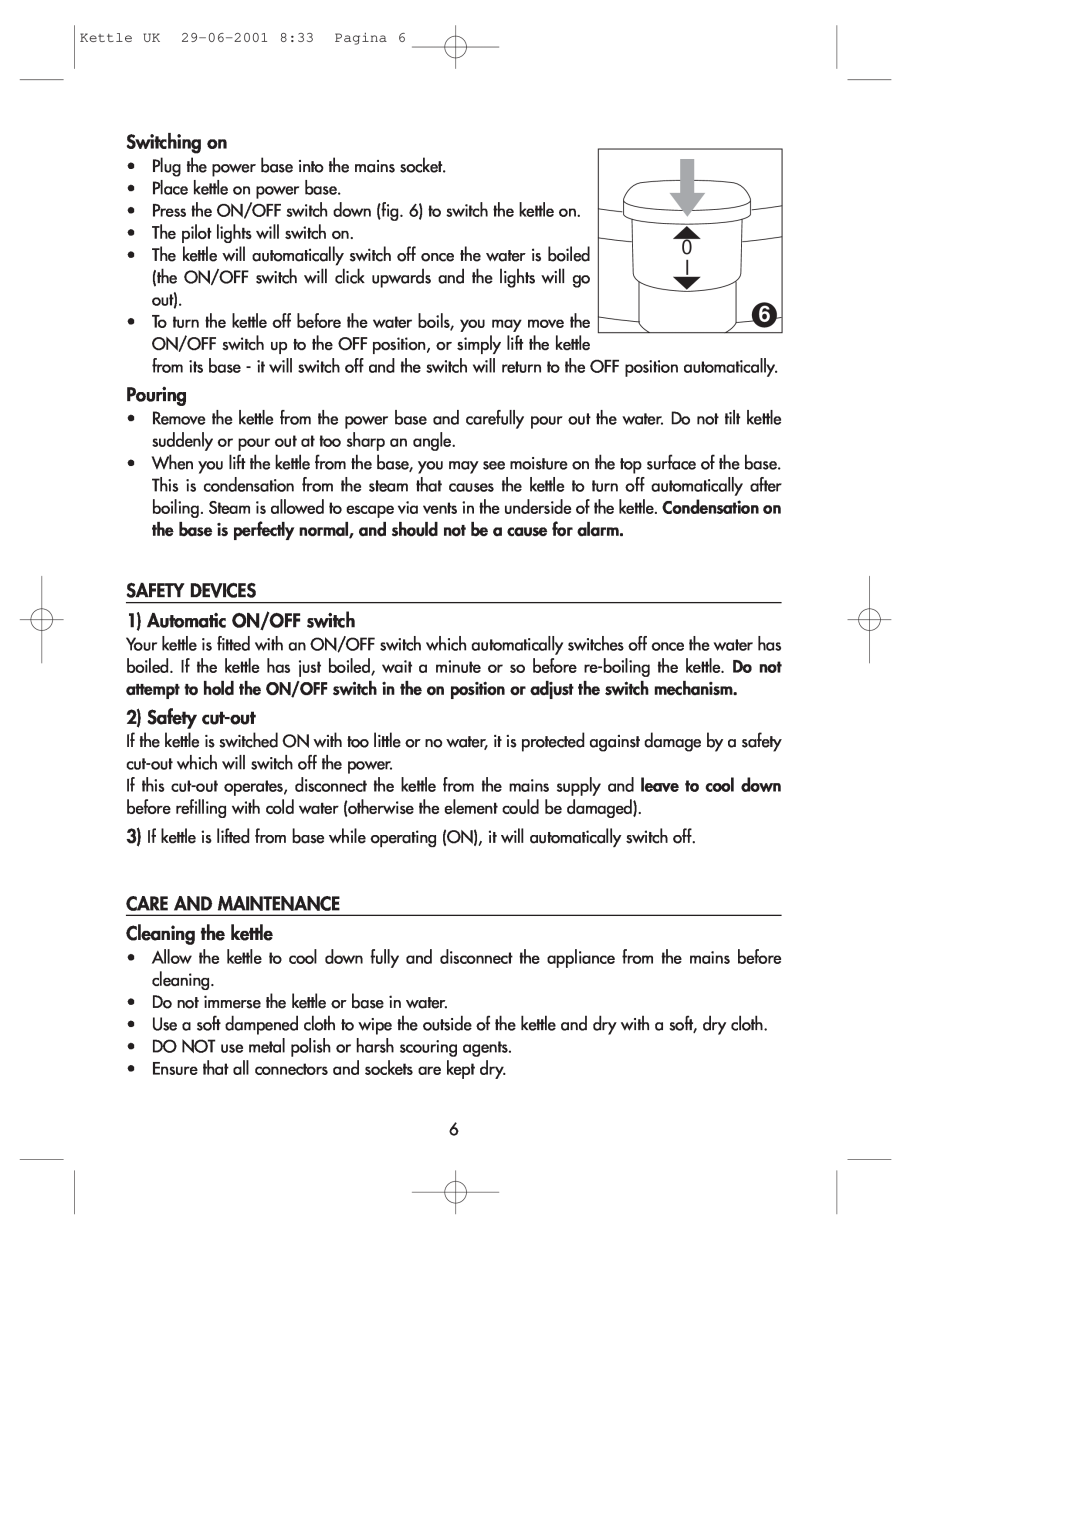 DeLonghi Kettle manual Switching on, Pouring, SAFETY DEVICES 1 Automatic ON/OFF switch, Safety cut-out 